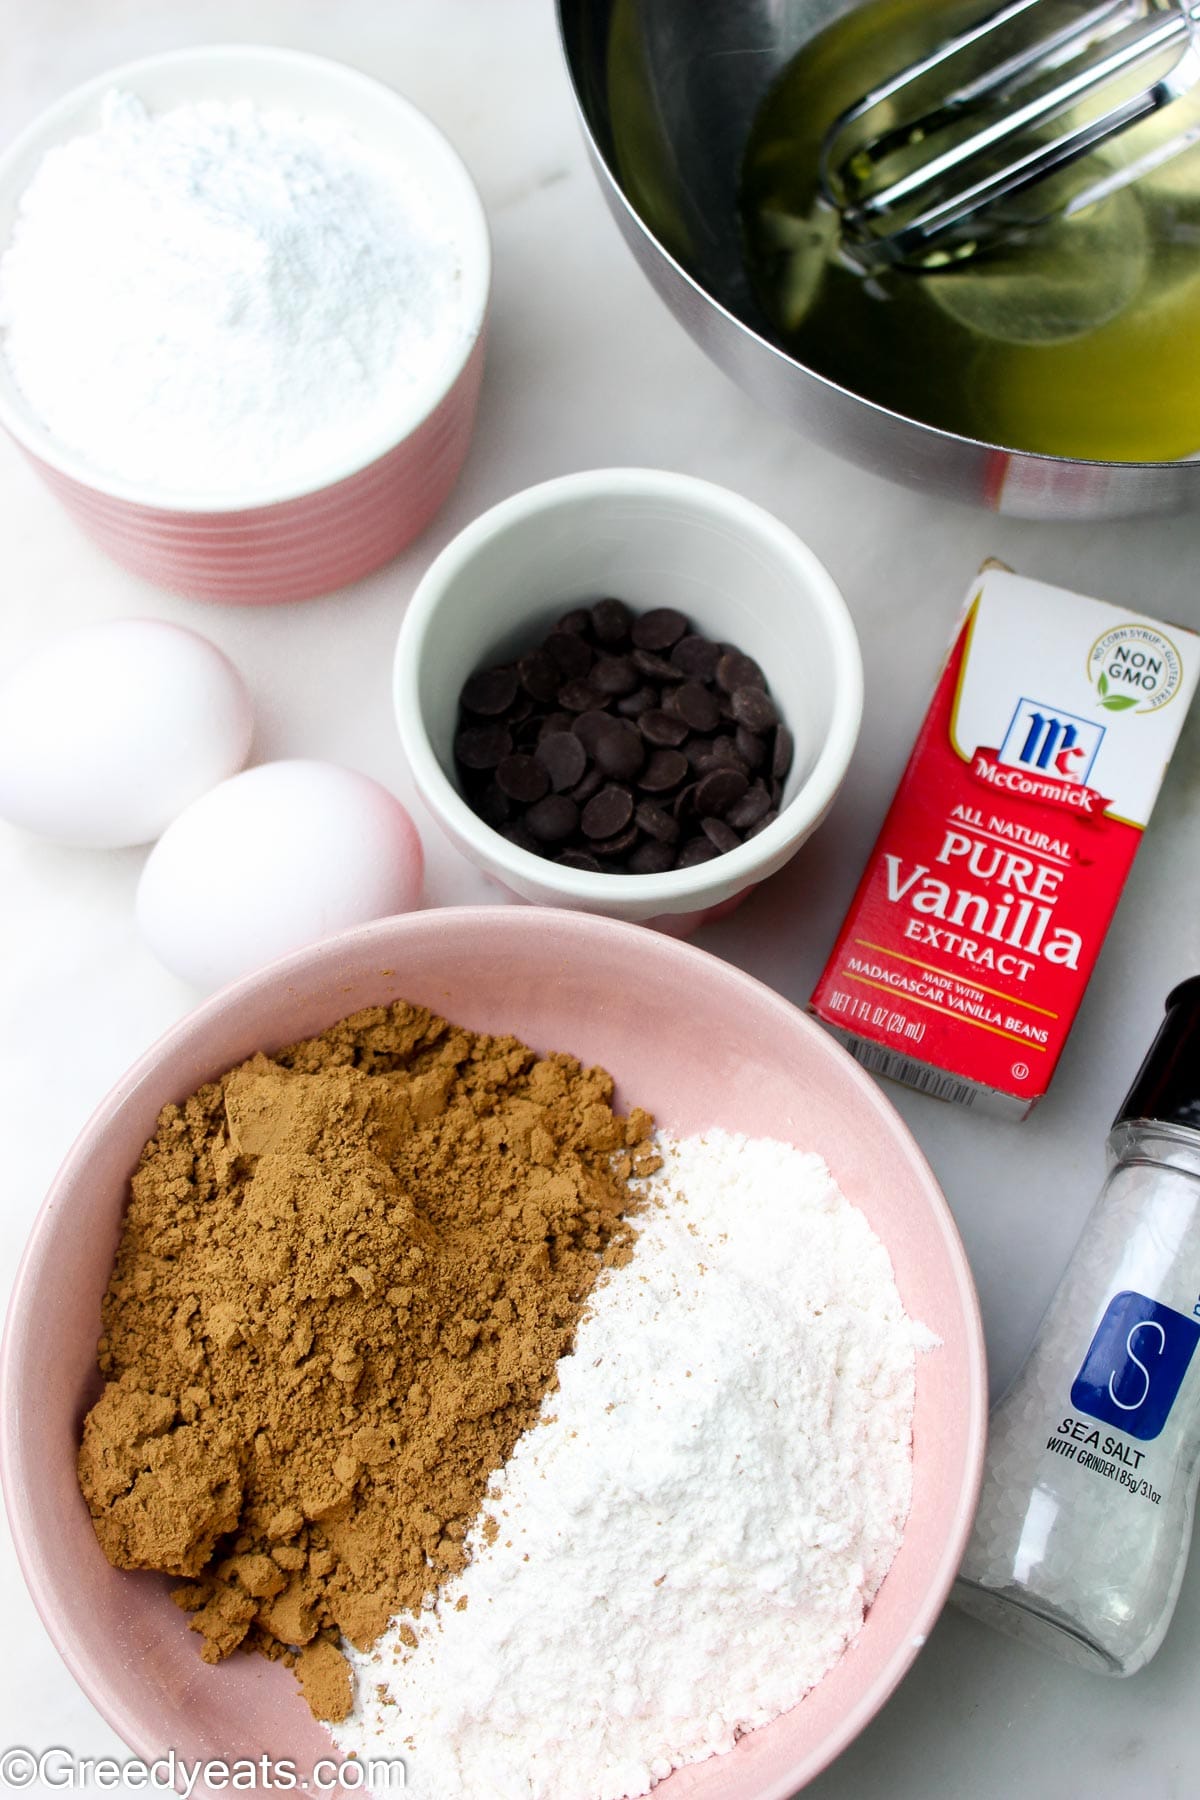 Ingredients like cocoa, flour, eggs, vanilla and sugar to make brownies.